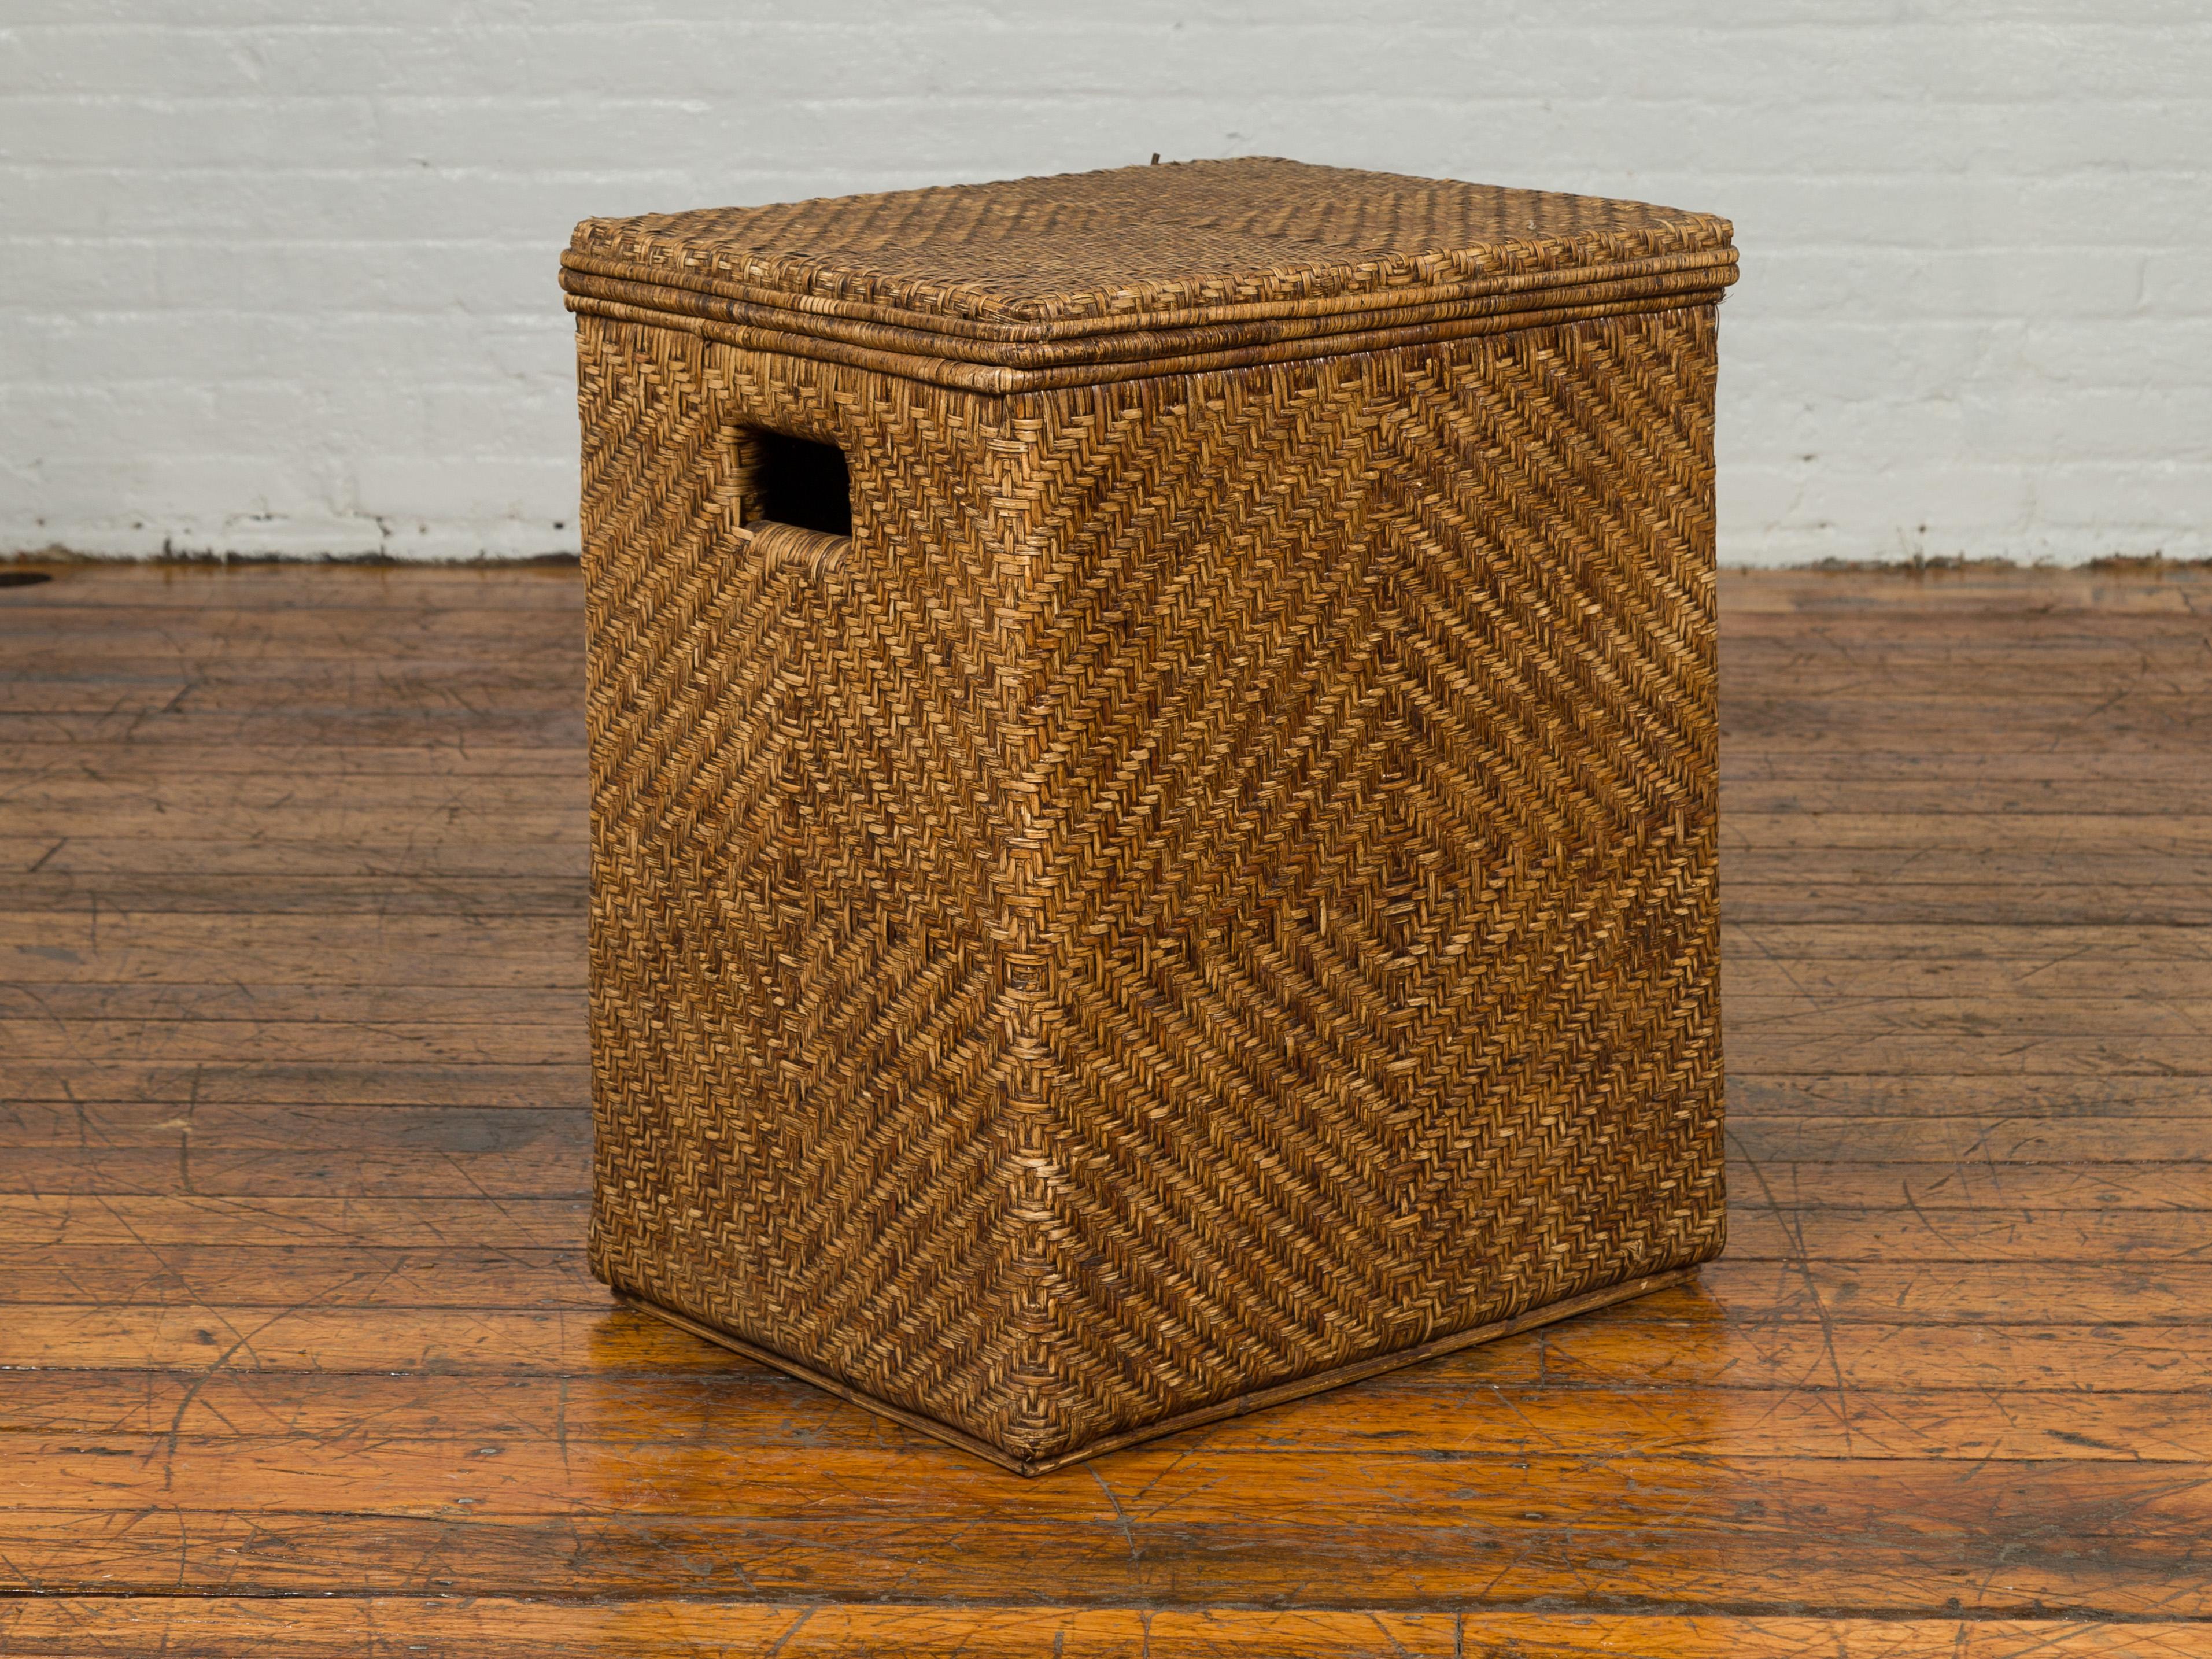 A Burmese handwoven rattan clothes hamper with pierced handles and lid. Crafted in Myanmar, this handwoven rattan hamper features a rectangular lid sitting above a linear body pierced on the sides to allow the piece to be moved more easily.